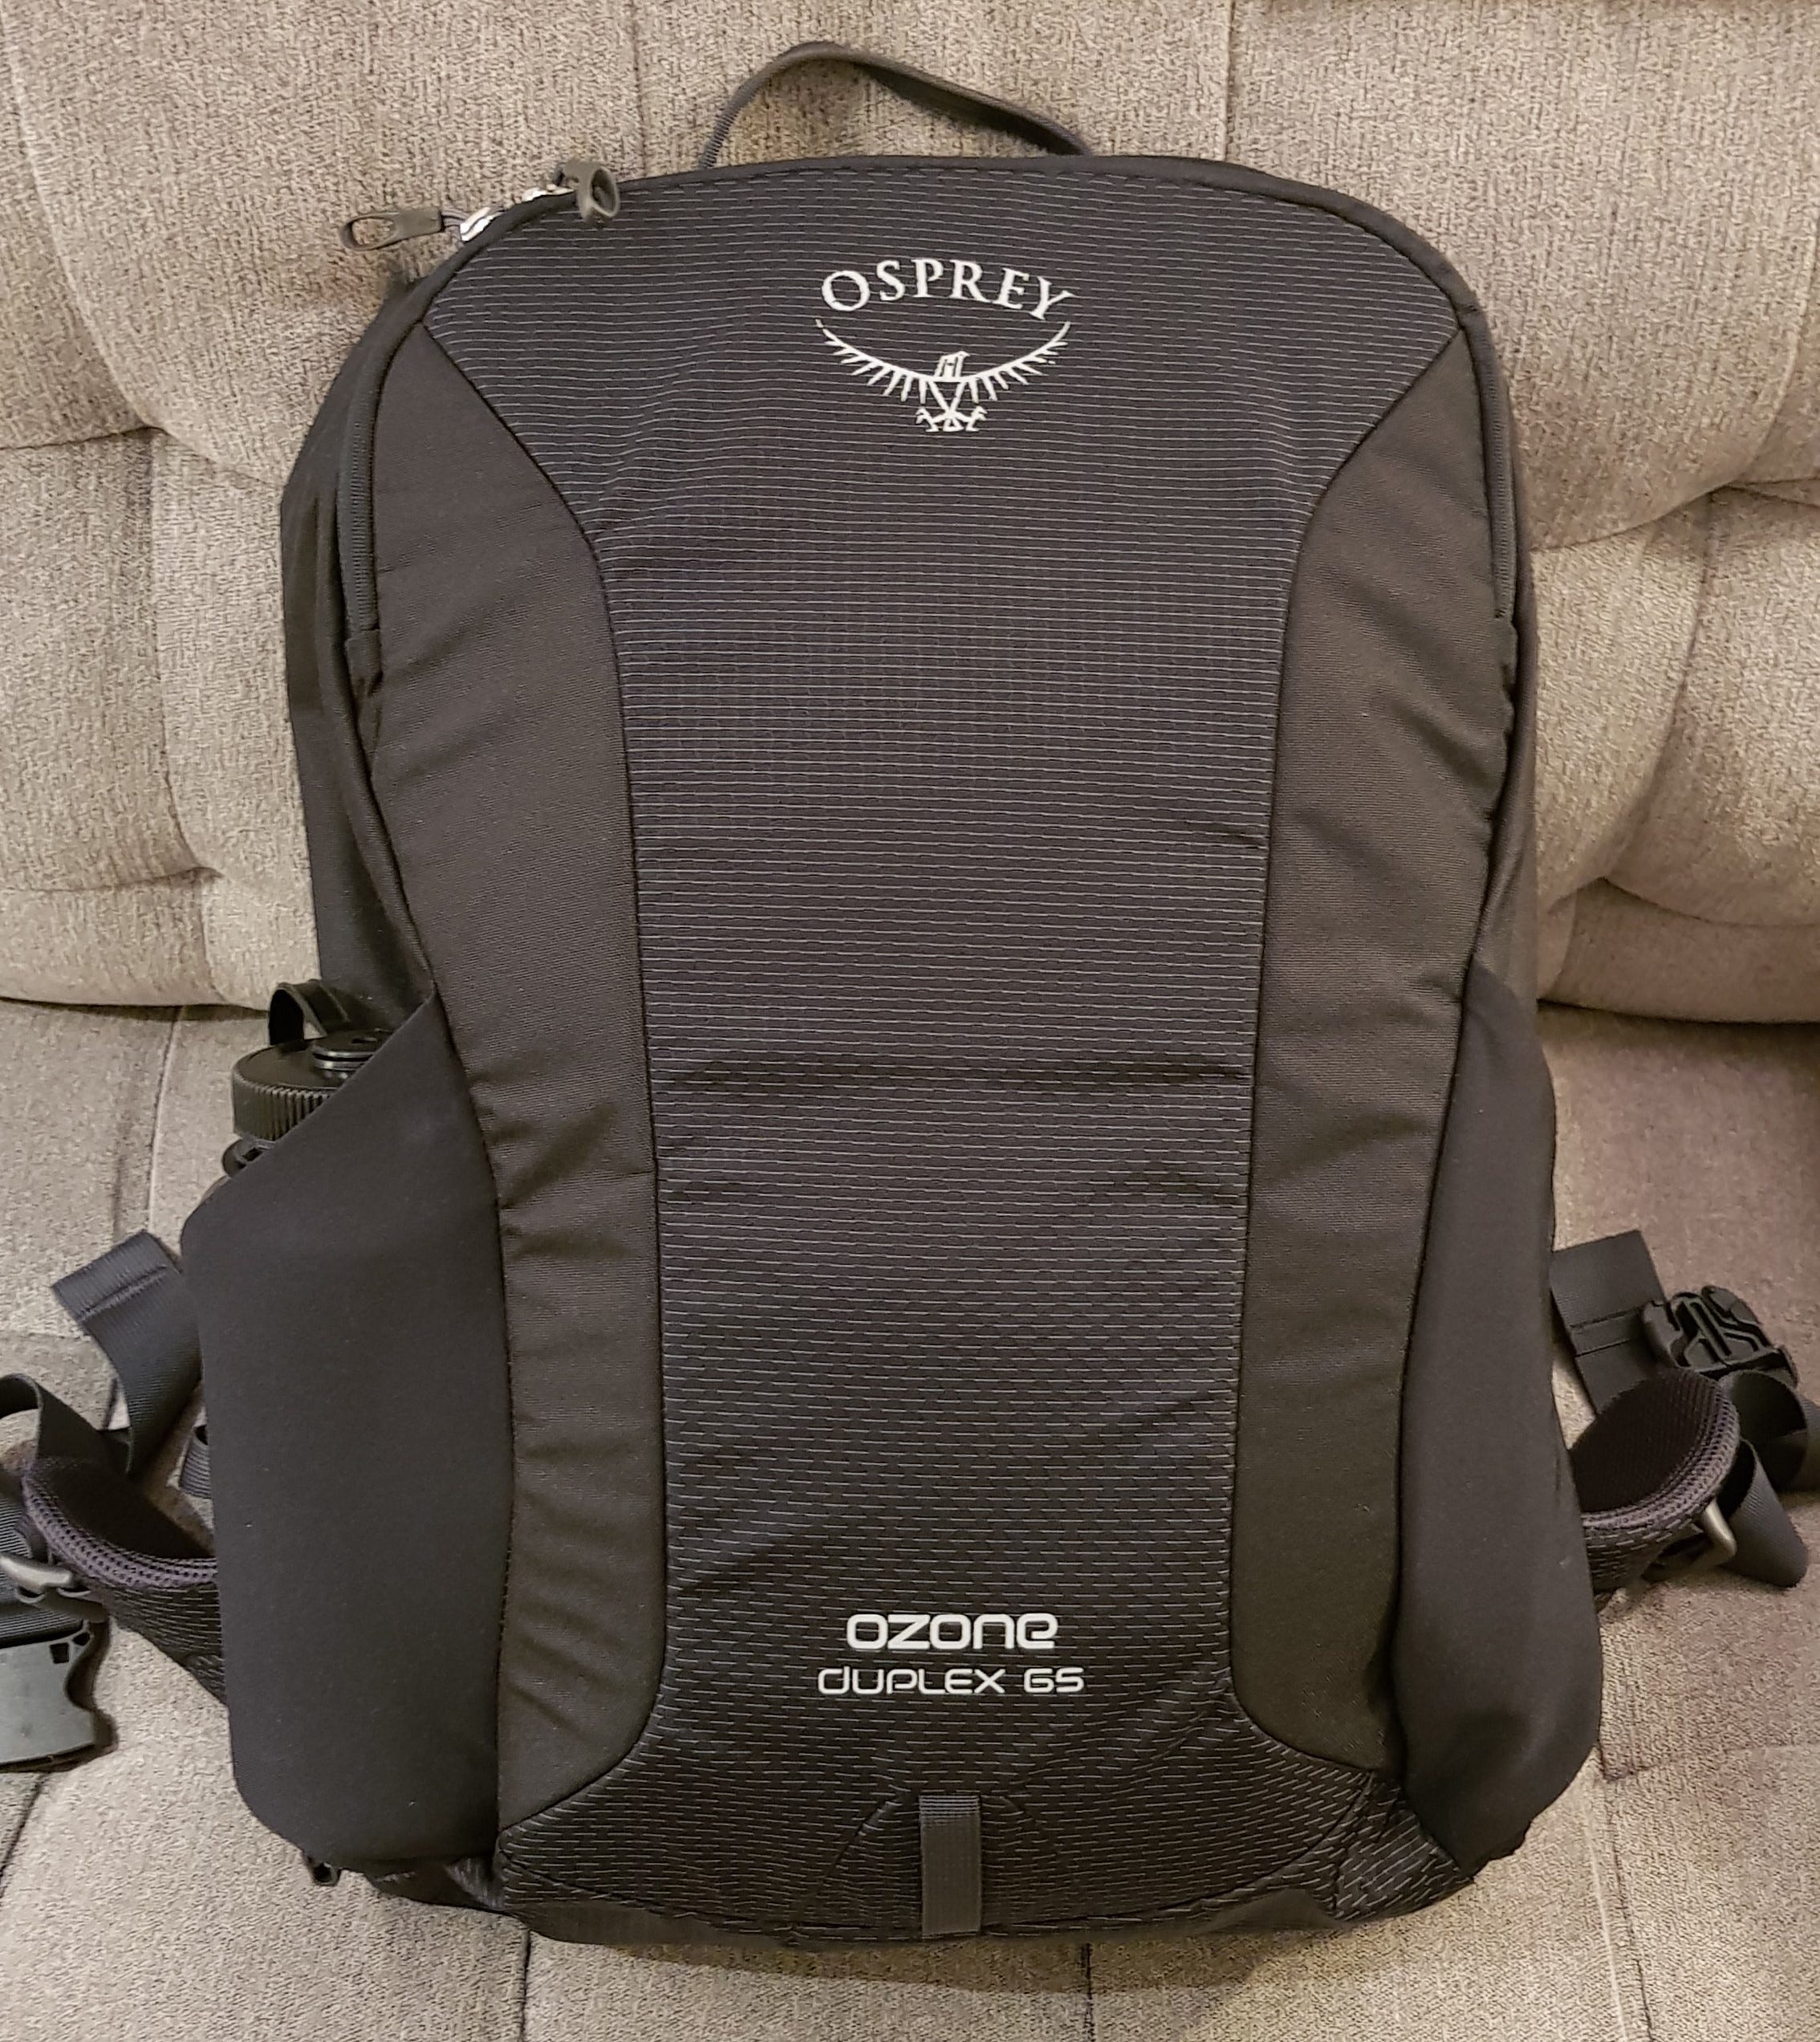 Ozone Boarding Bag - Personal-Size Carry-On Shoulder Luggage